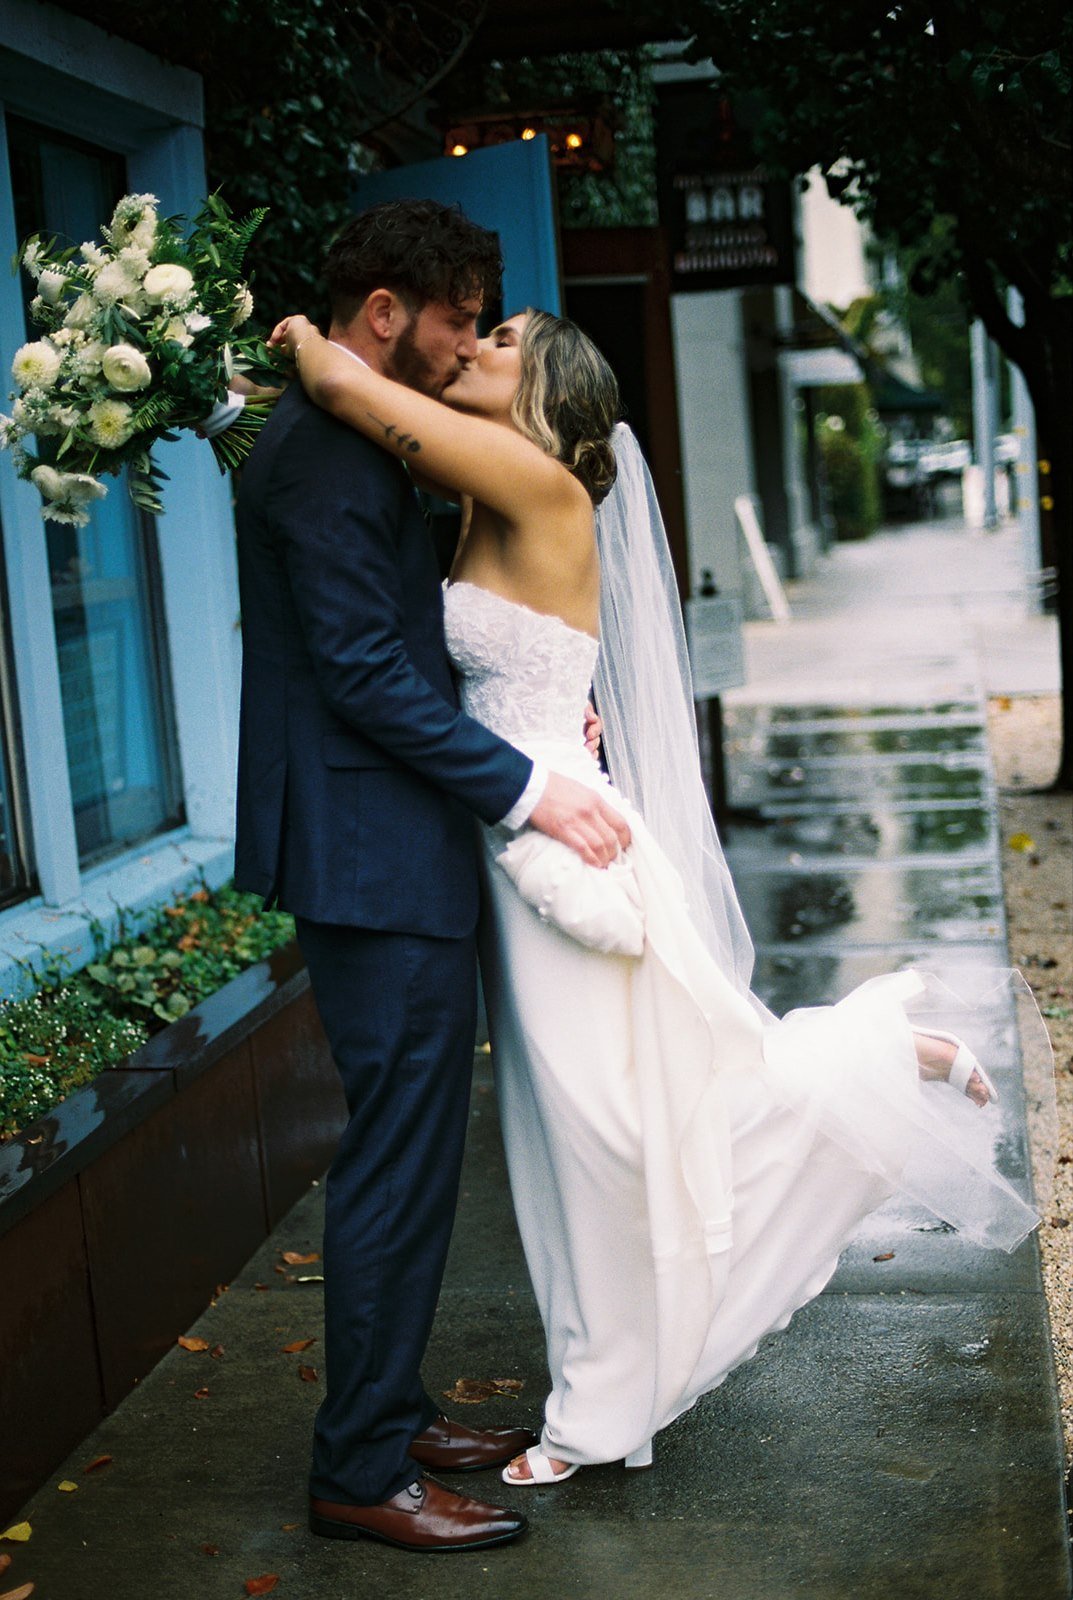 Film photos of bride and groom kissing